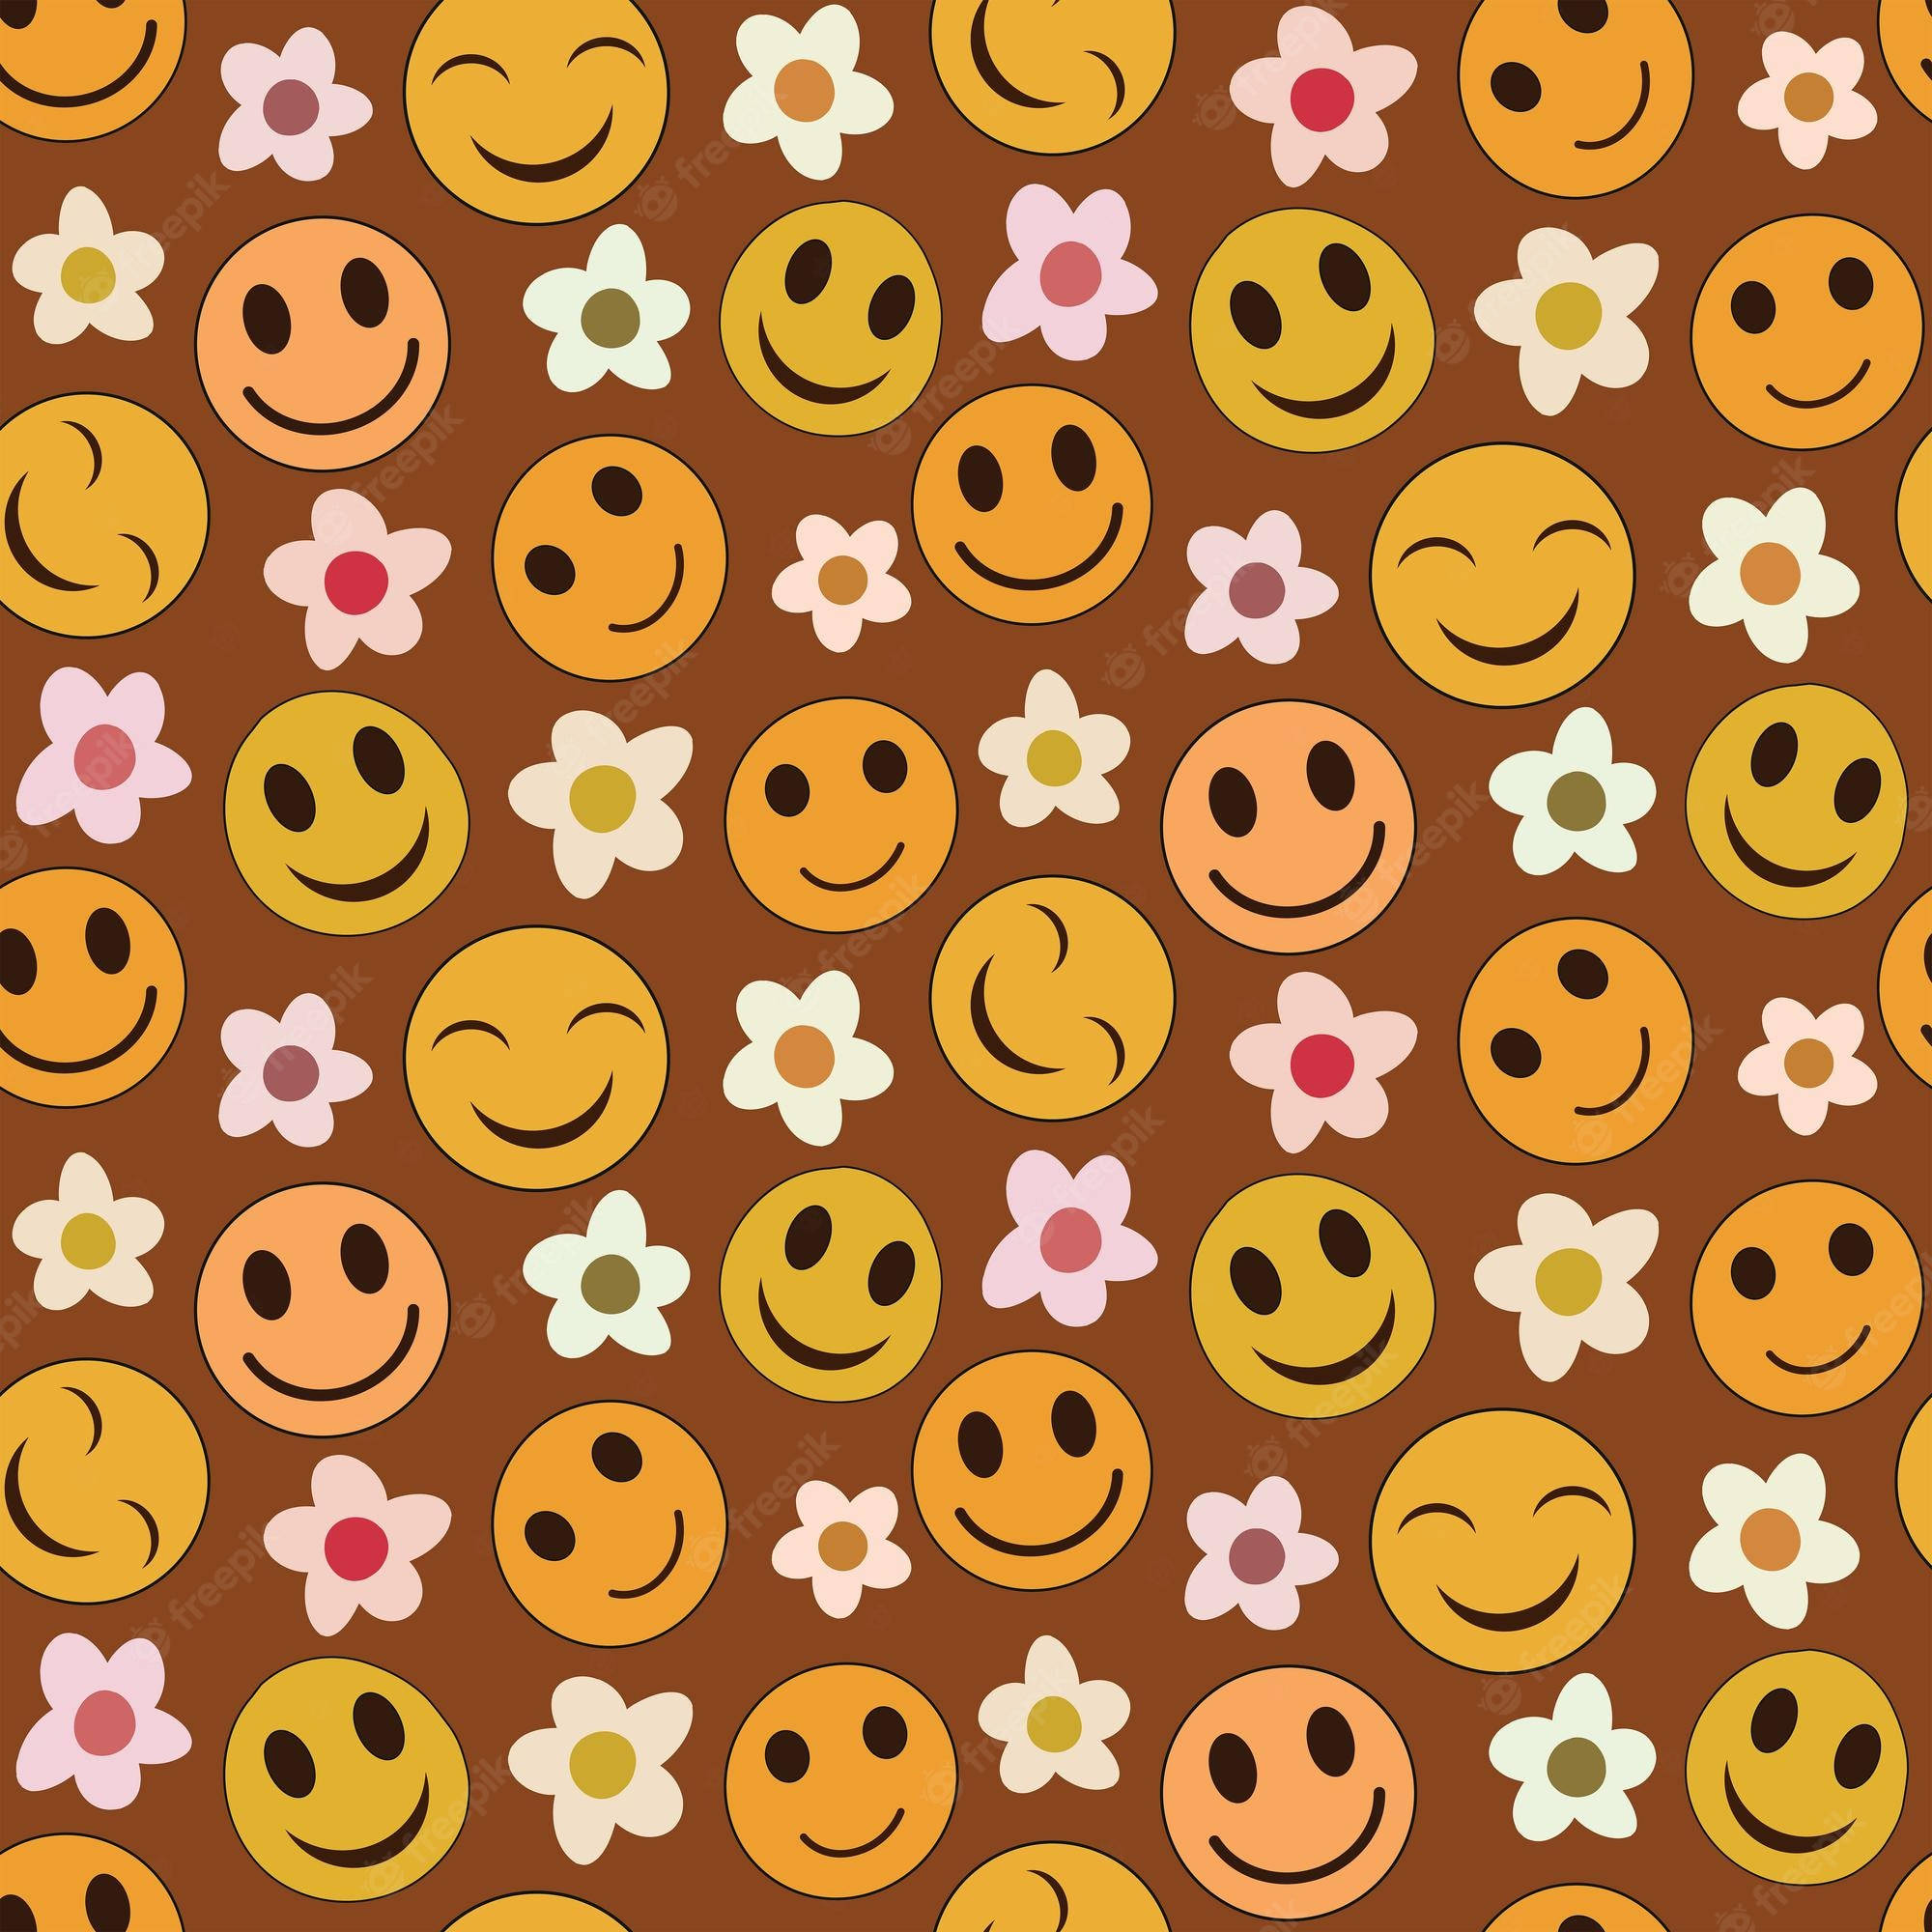 Download Preppy Smiley Face And Flowers Wallpaper